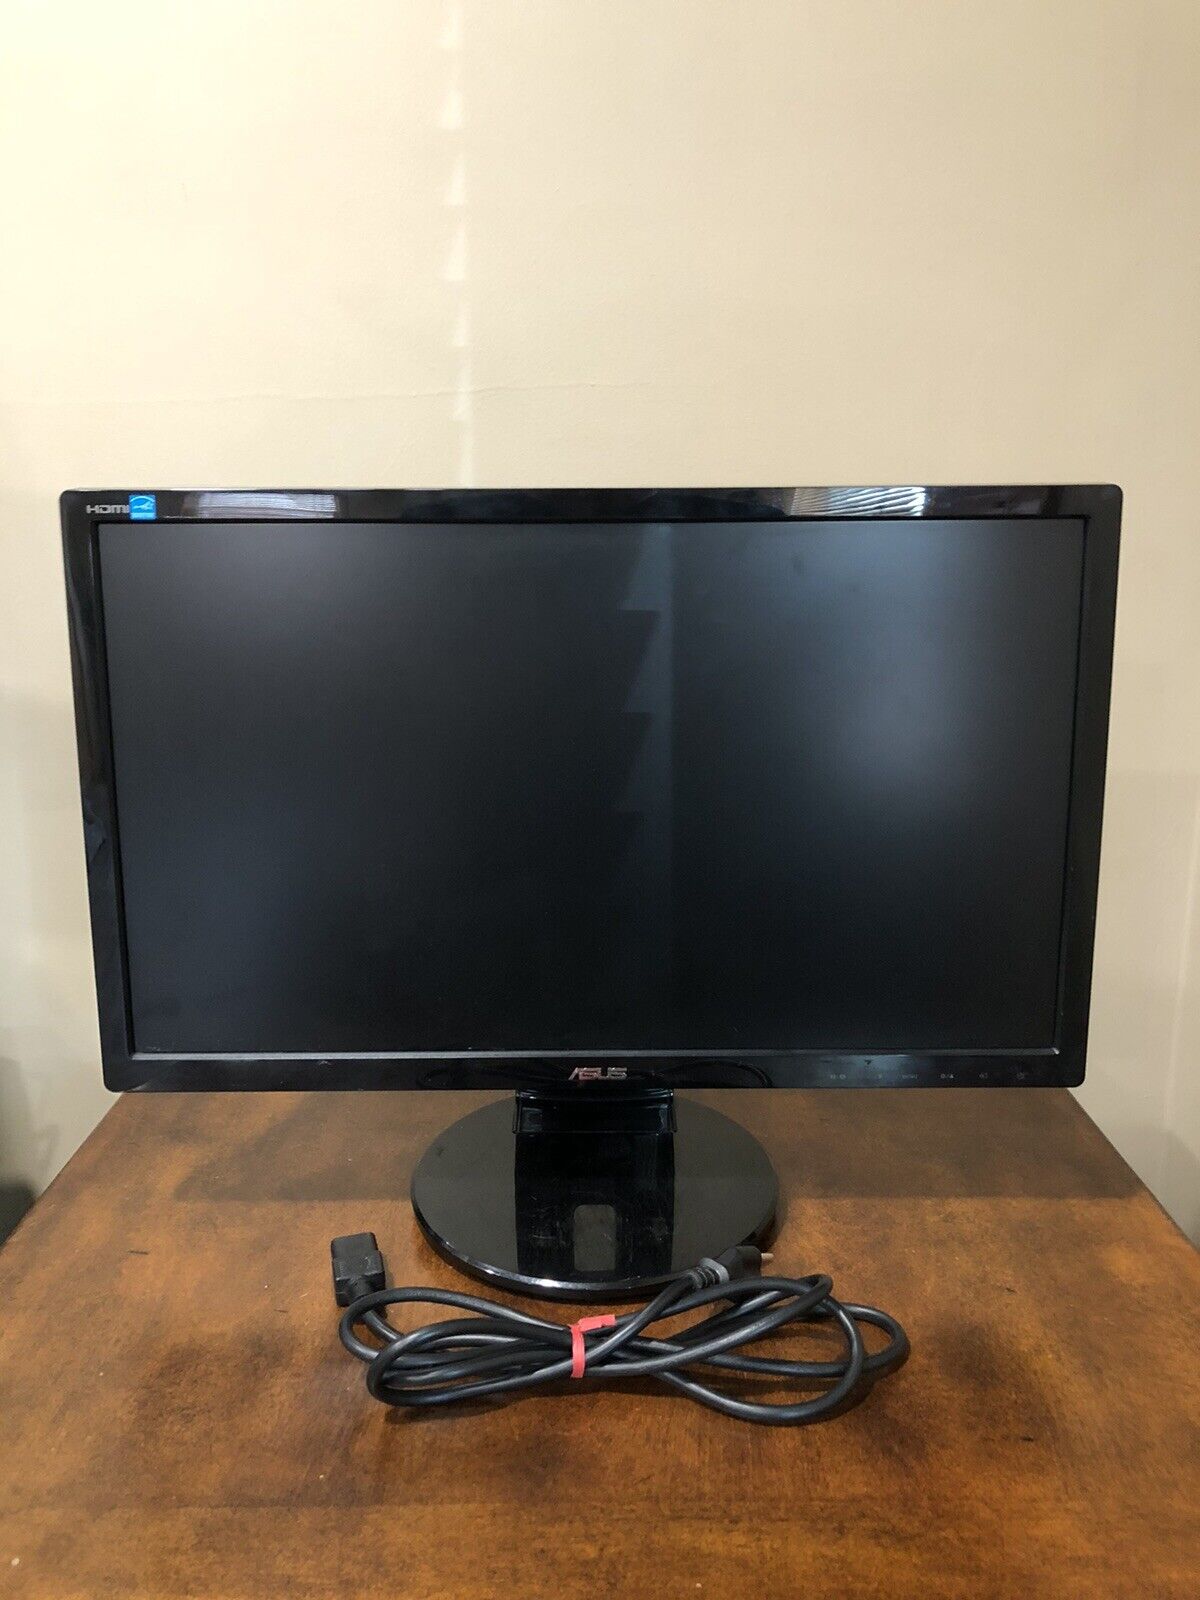 ASUS VE228H Monitor, W/Cables.